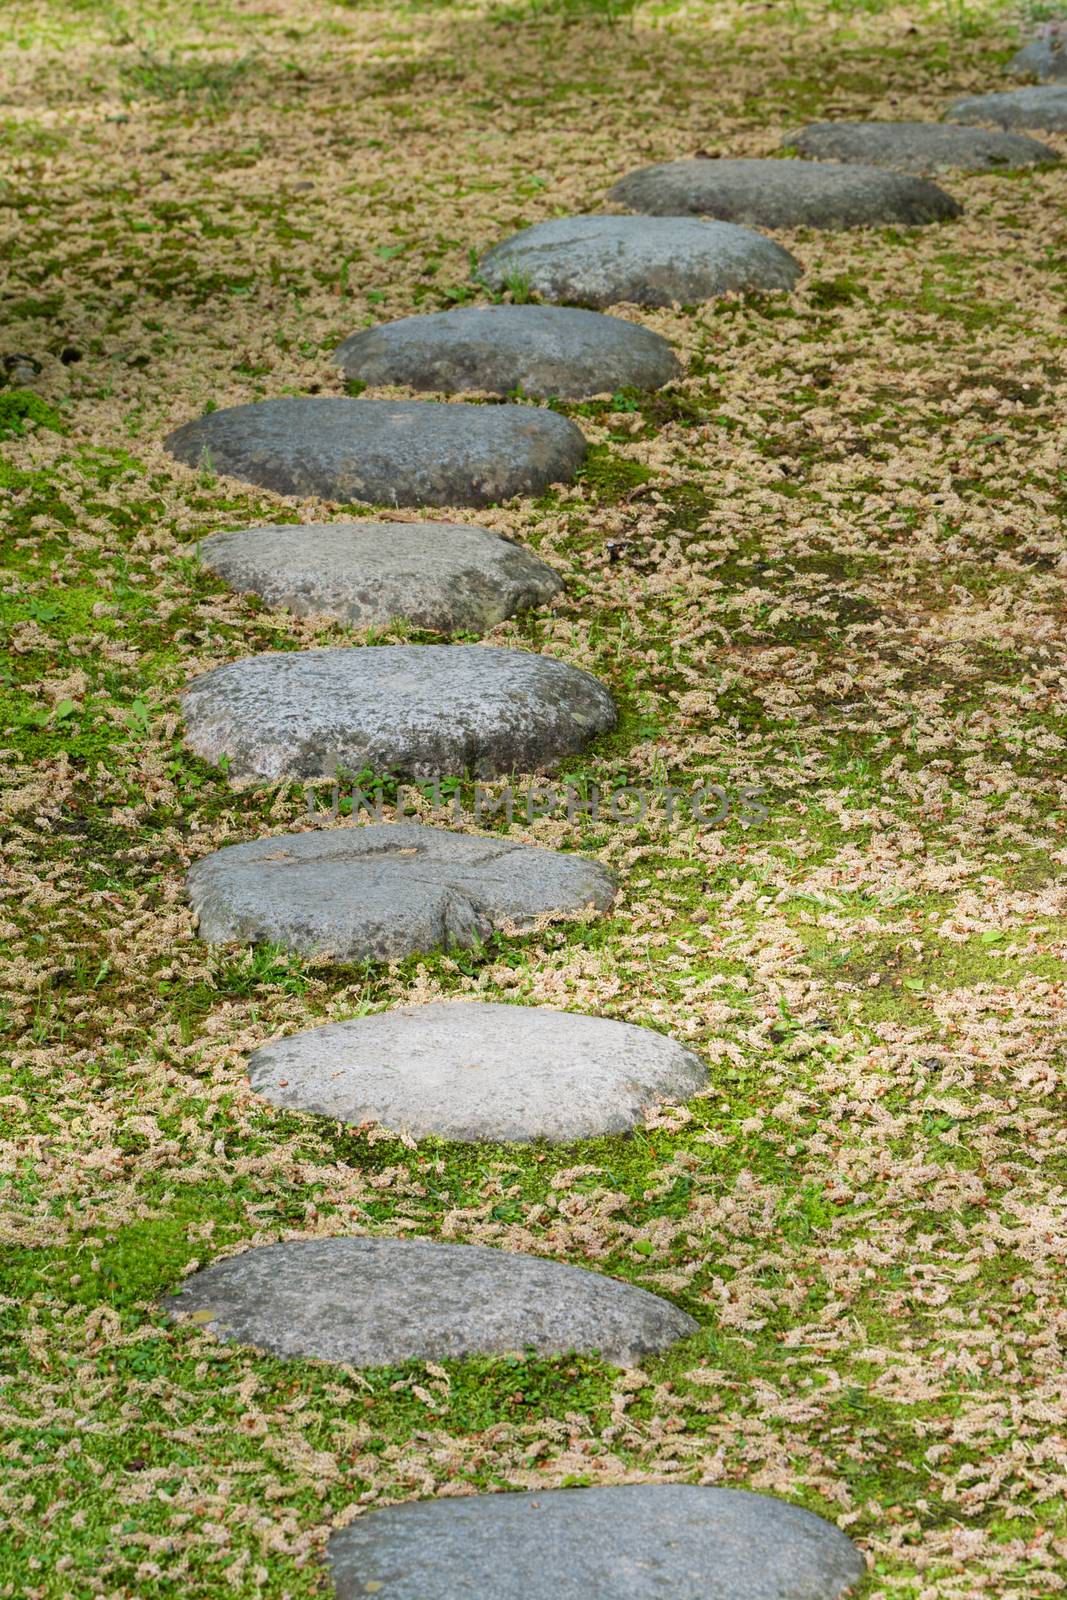 Stepping stones on grass with many fallen leaves.